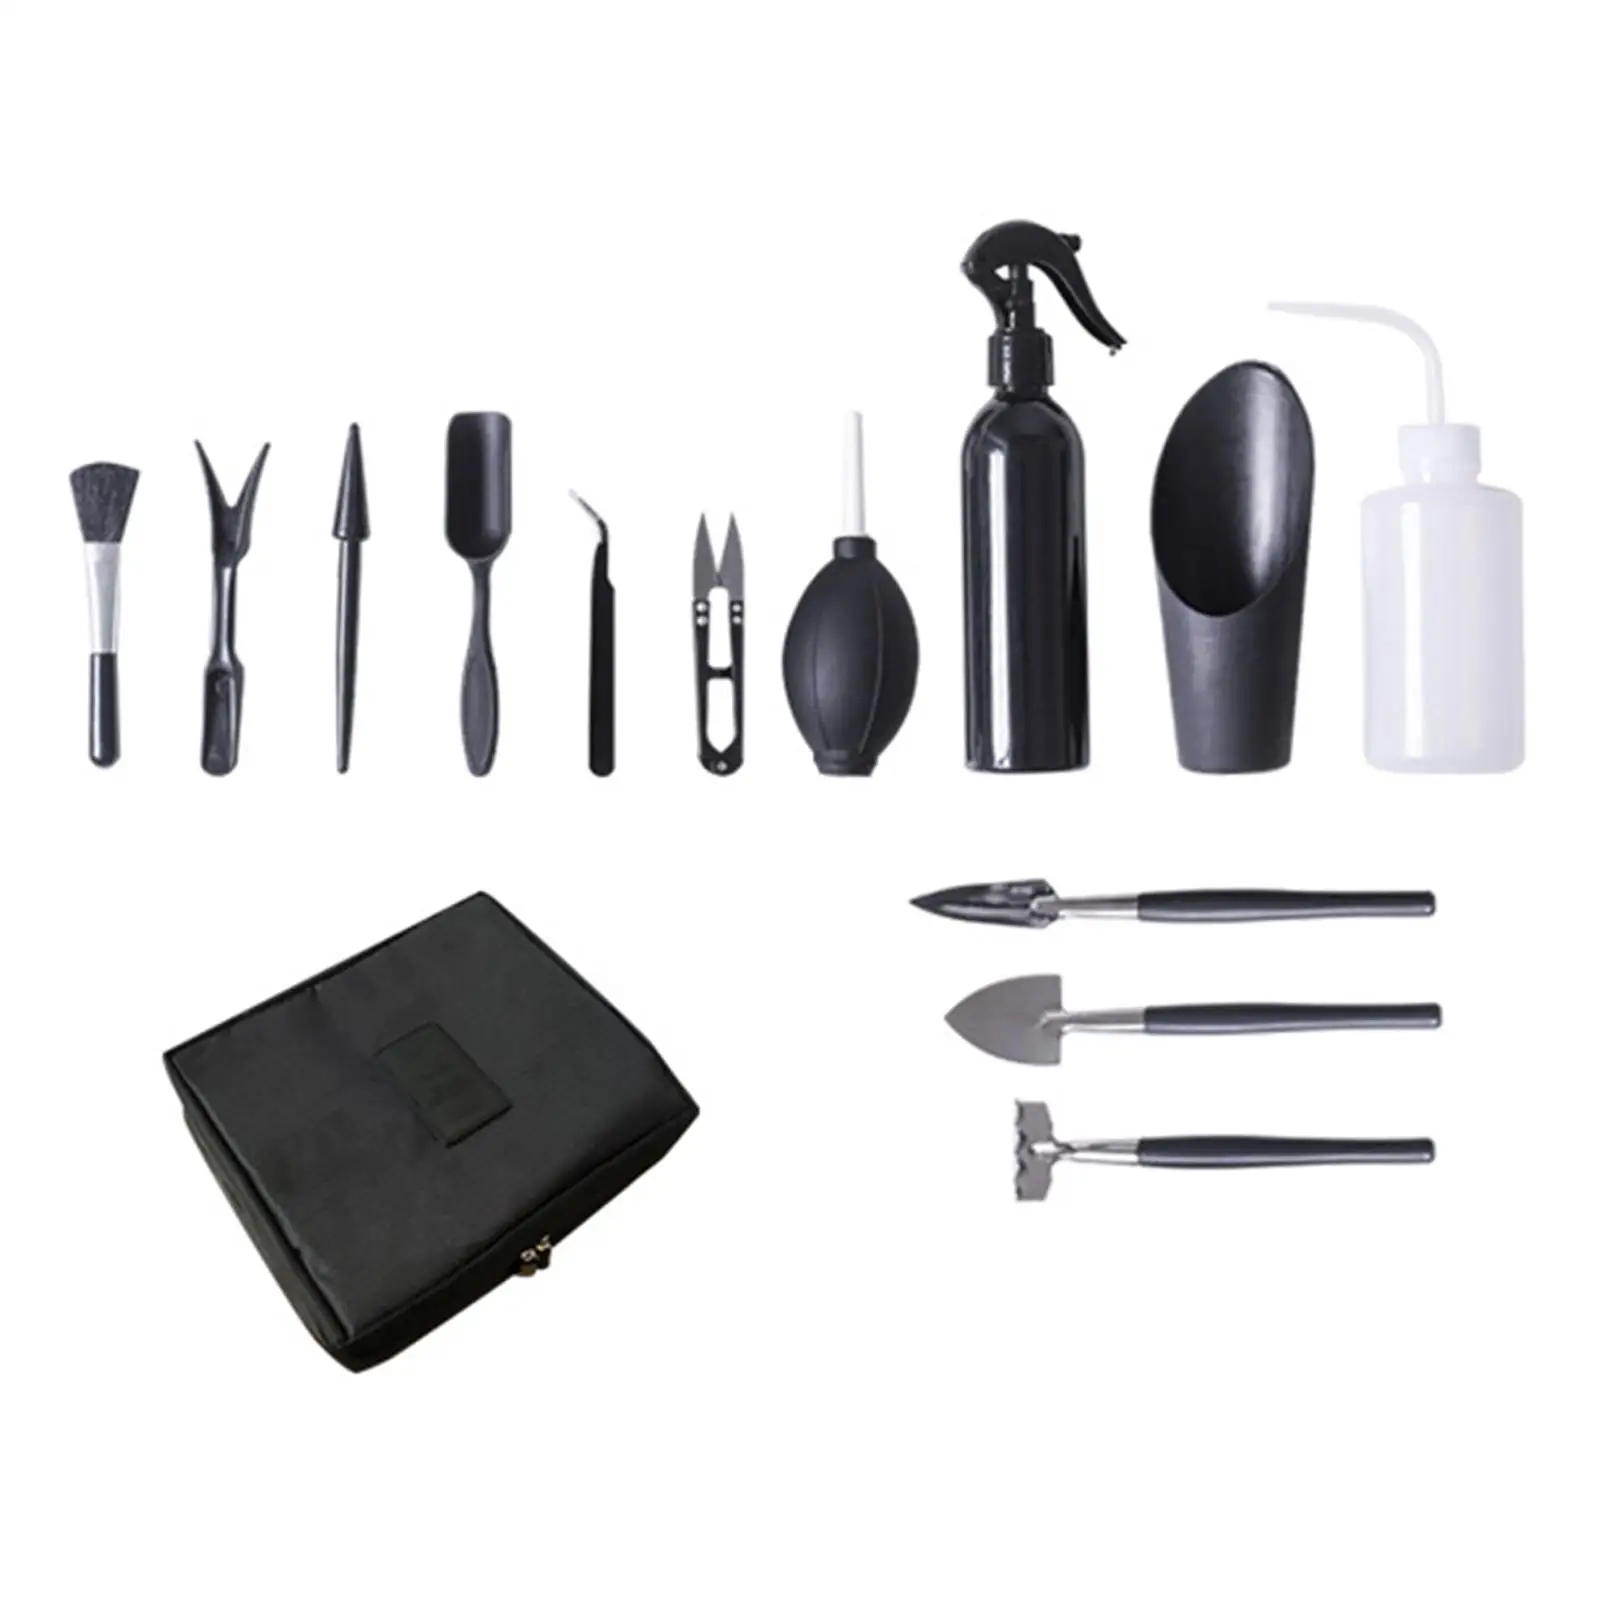 Succulent Hand Transplanting Tools 13 Pieces Set for Miniature Planting Wide Range Uses Easy to Carry Accessory Lightweight